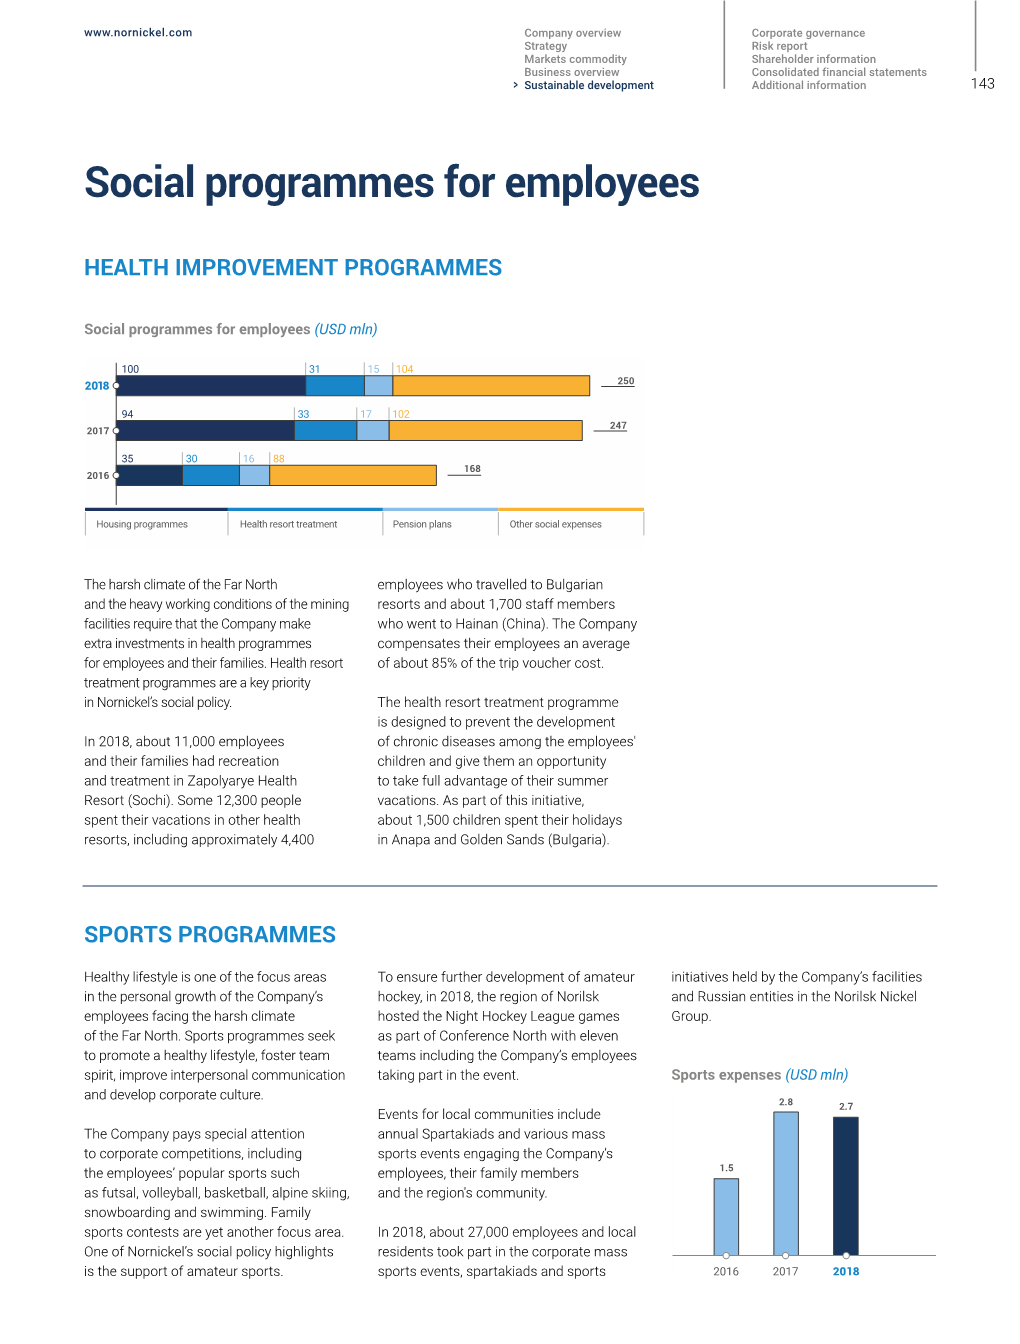 Social Programmes for Employees